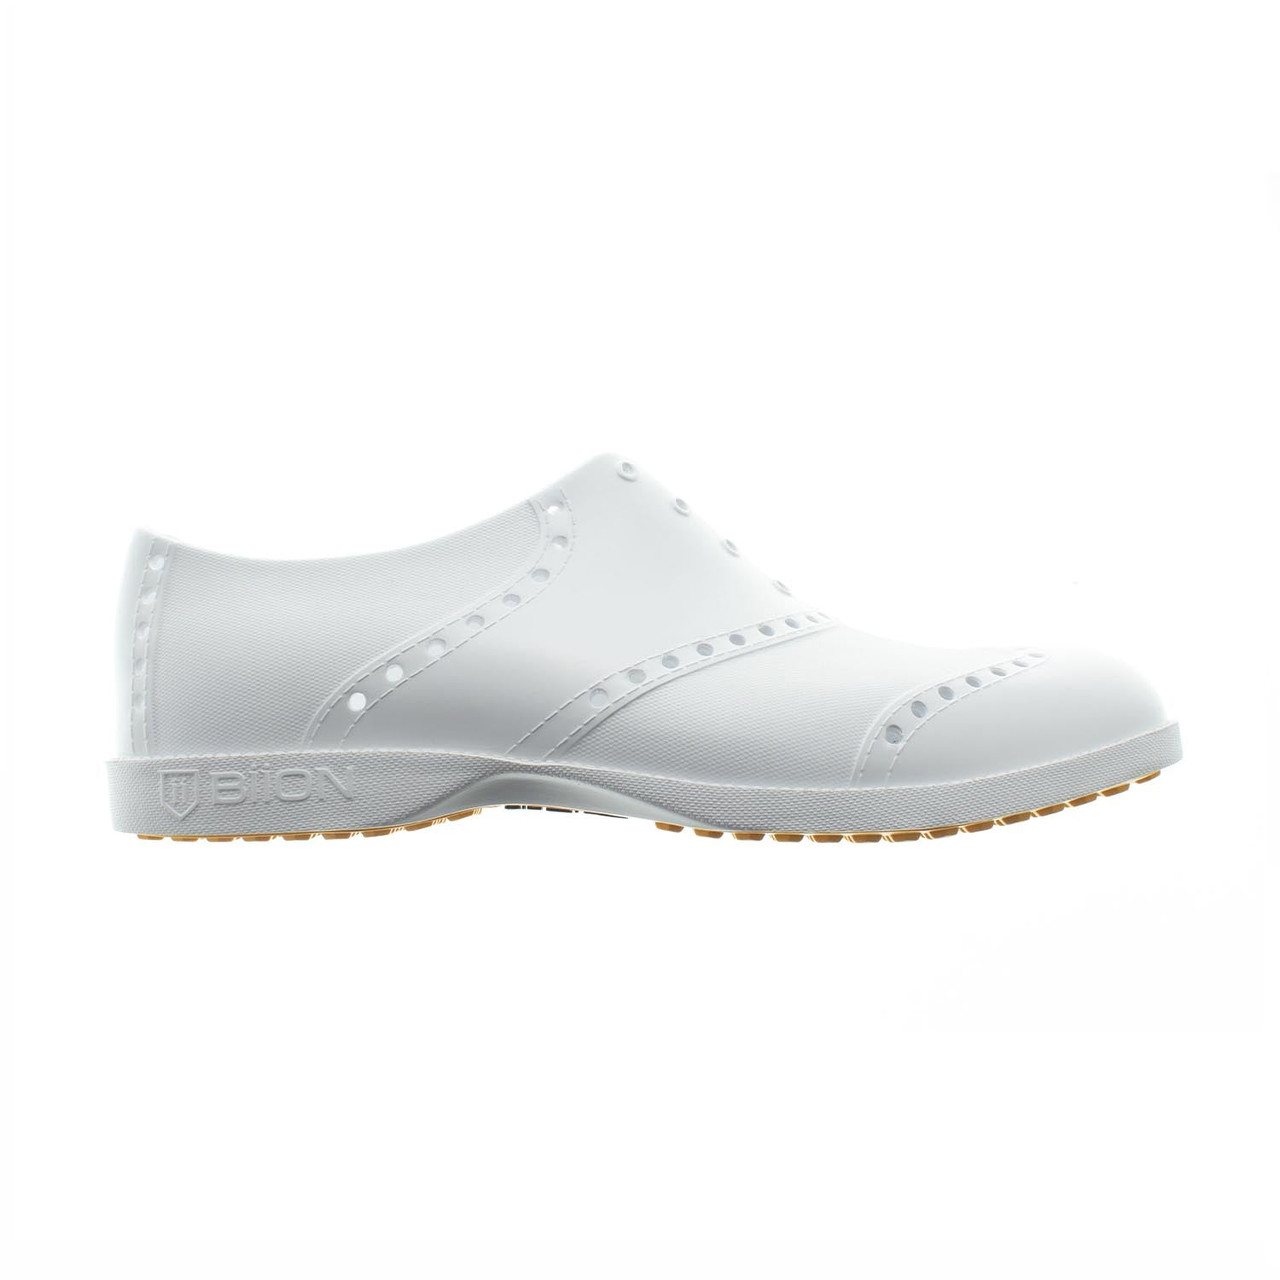 BIION Oxford Whiteout Golf Shoe | Golf4Her